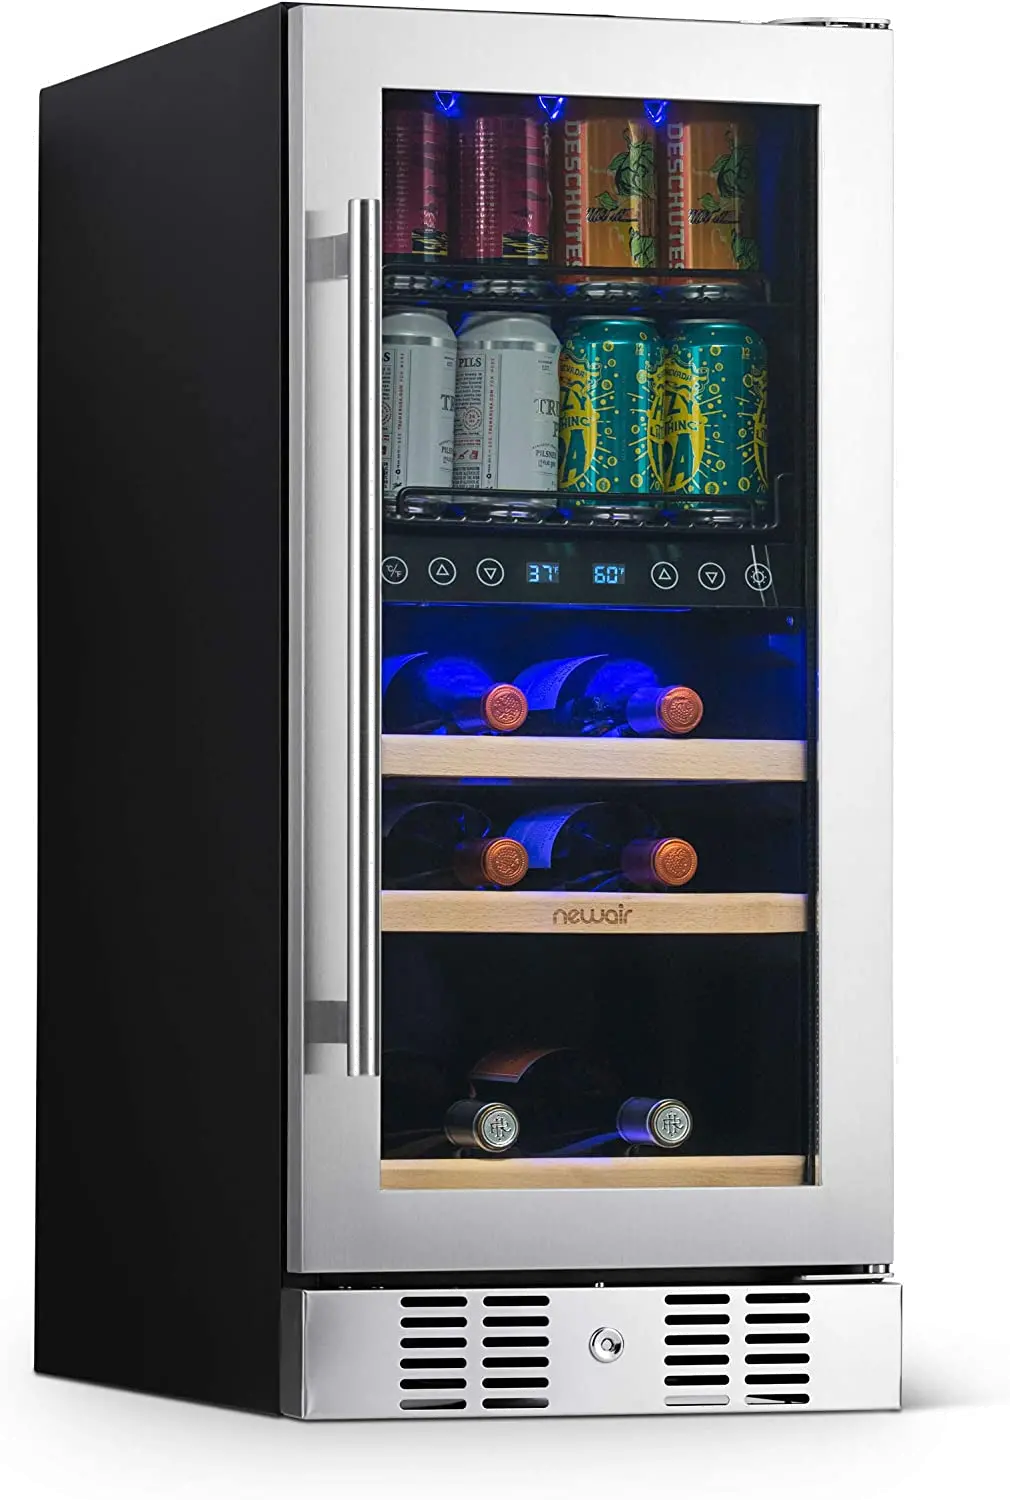 NWB057SS00 New Air 15 Premium Built-in Dual Zone Wine and Bev sku NWB057SS00